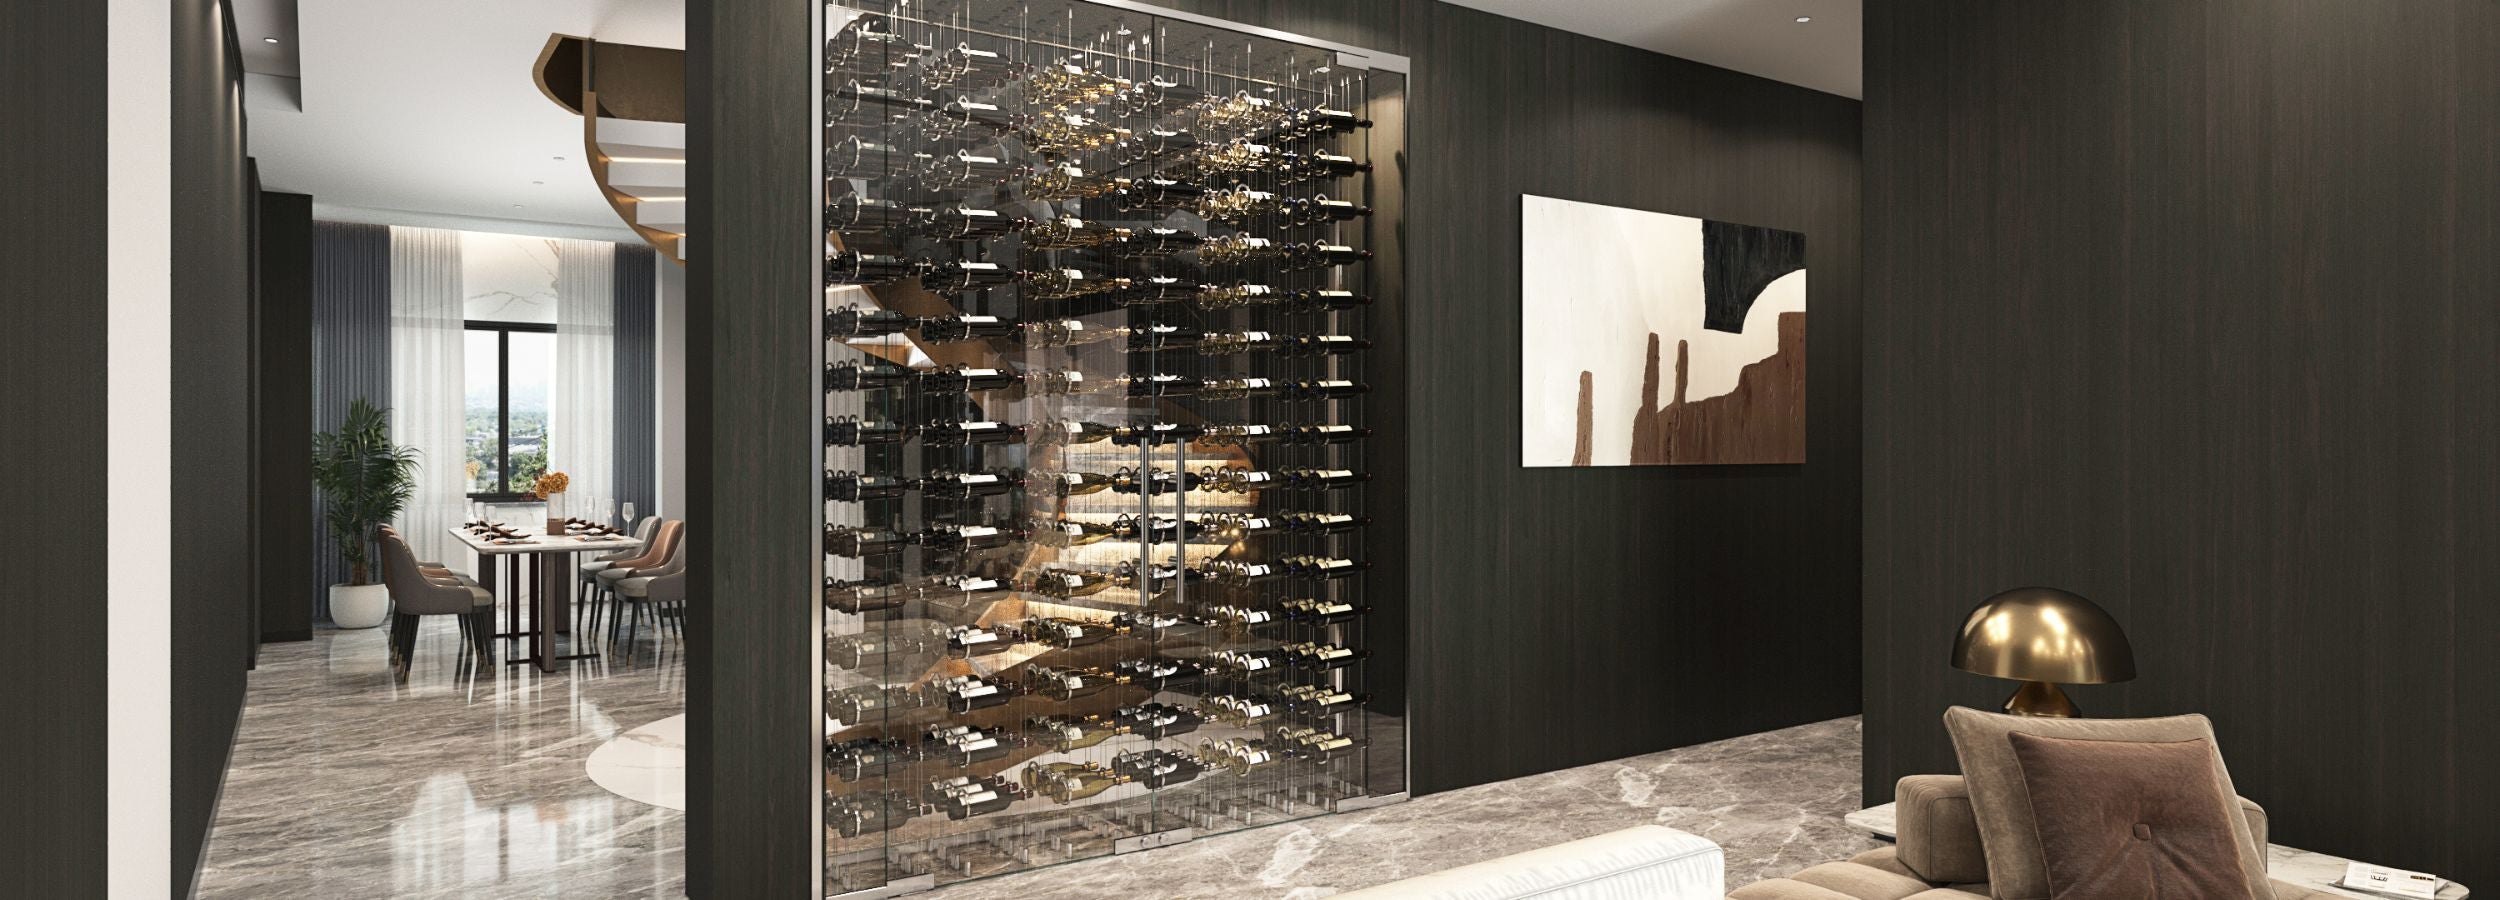 Build a Wine Cellar: Designing the Perfect Space for Your Wine Collection